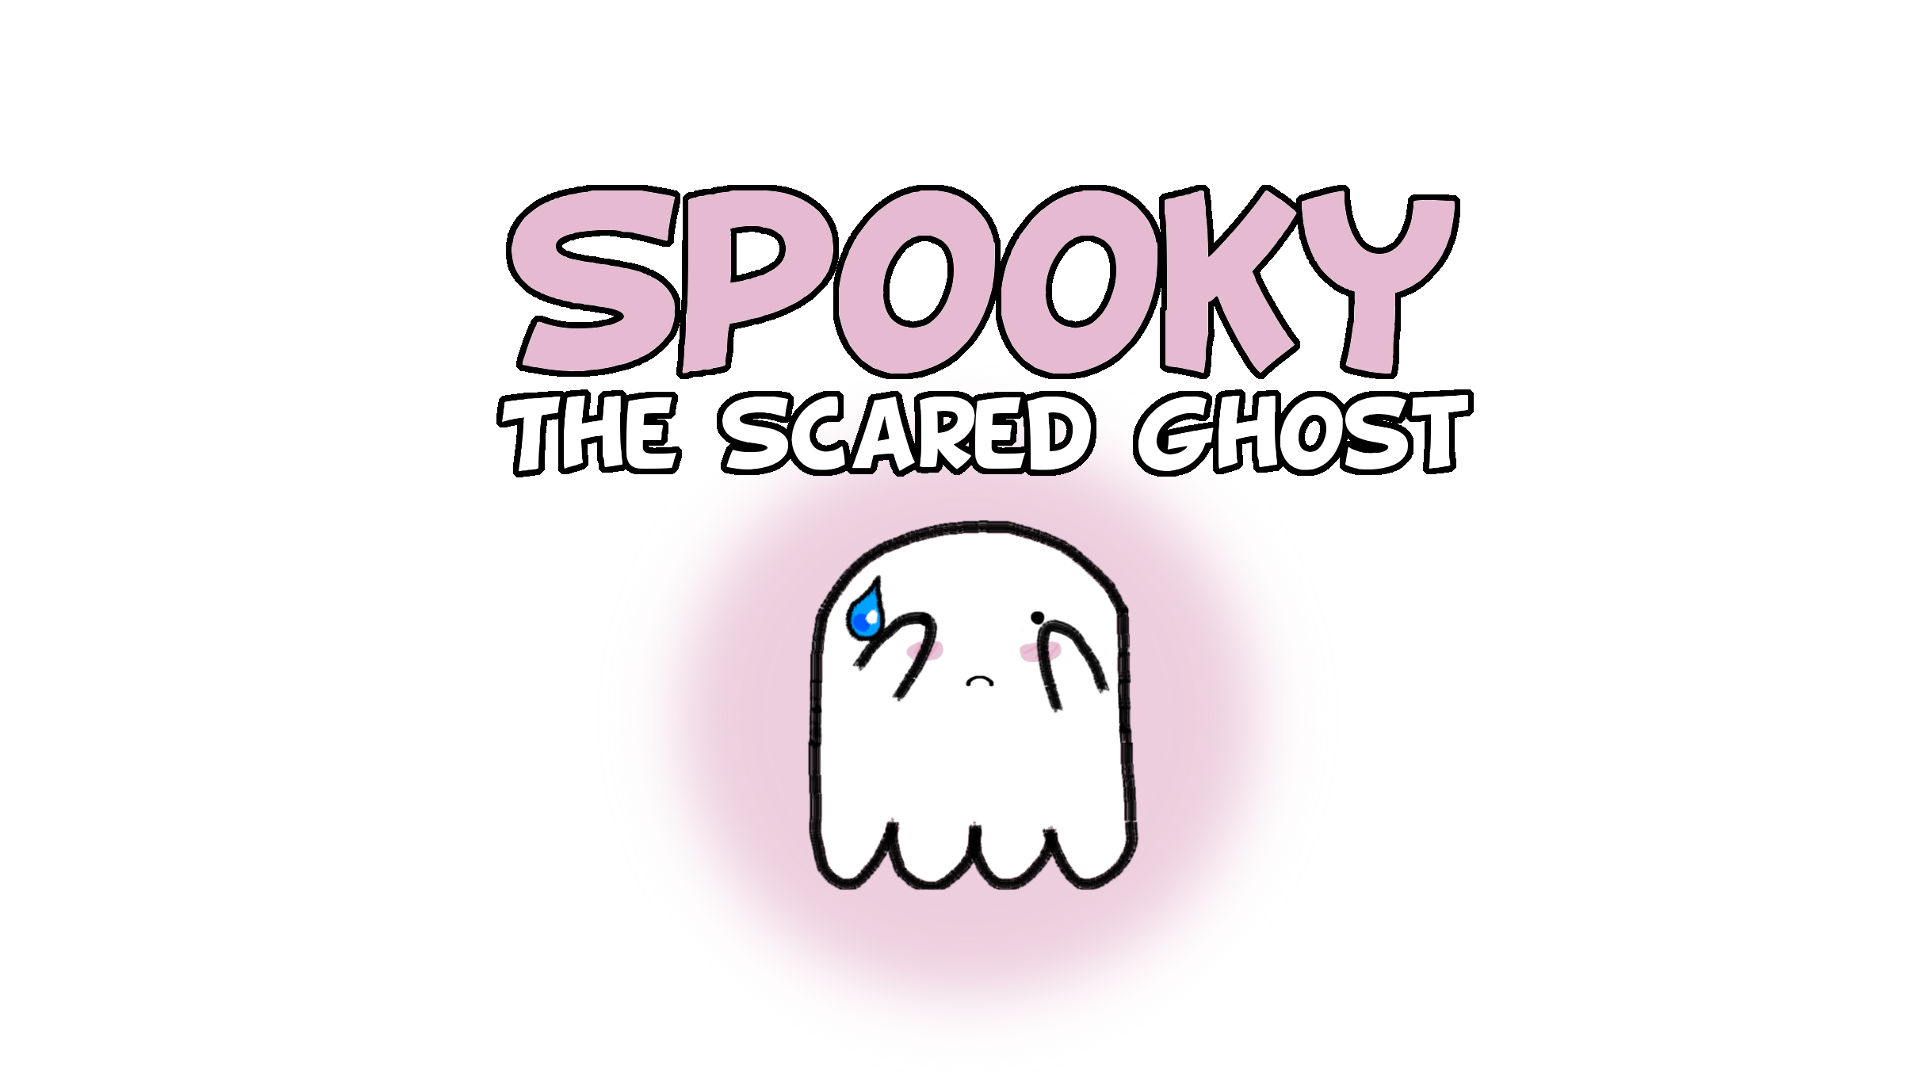 Spooky the Scared Ghost